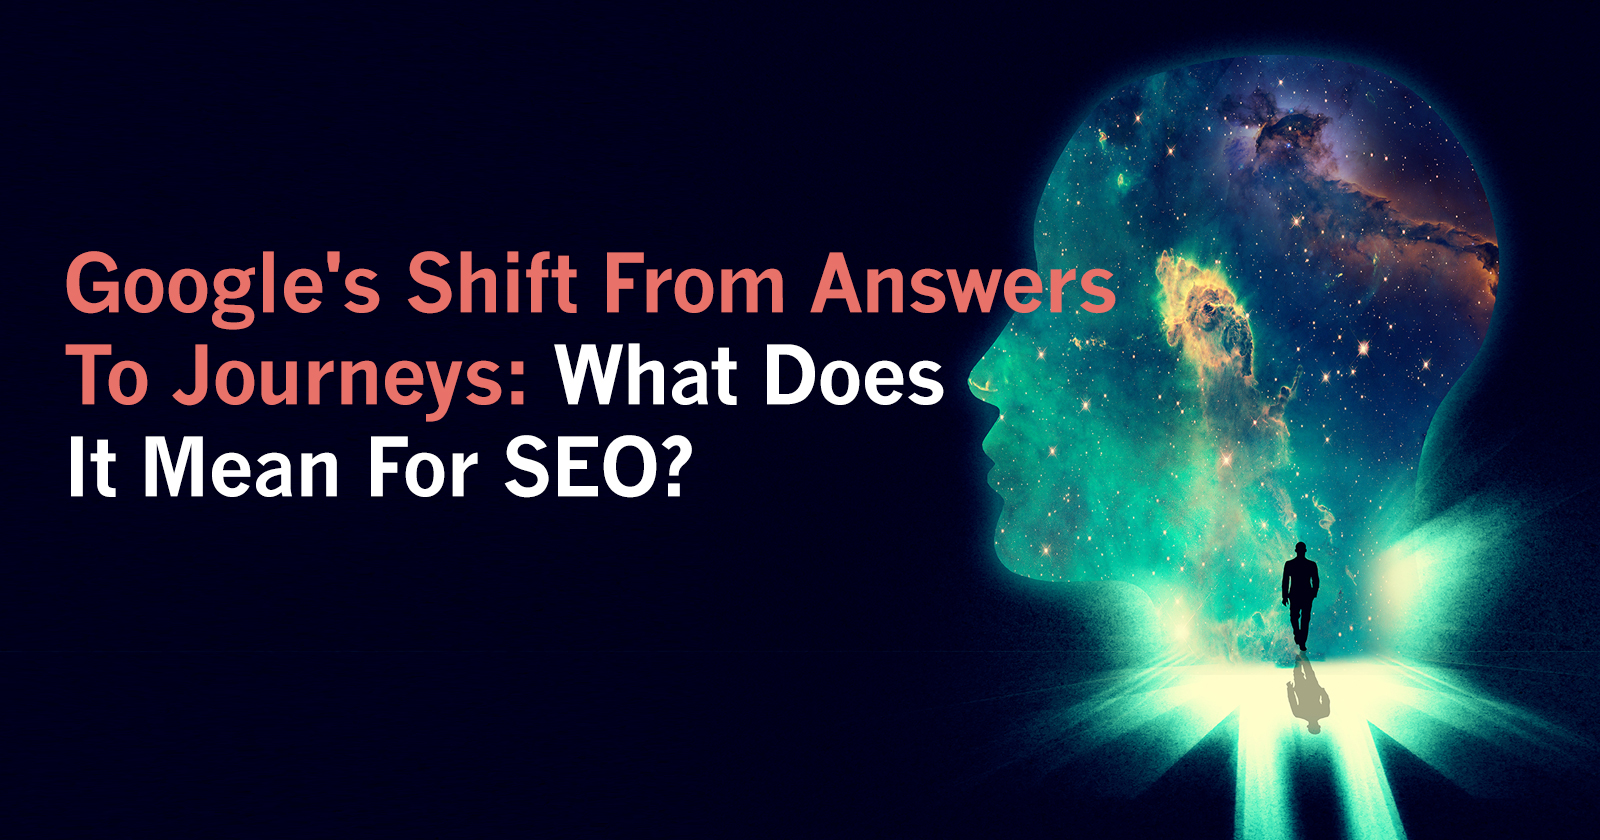 Googles Shift from Answers to Journeys - What Does it Mean for SEO